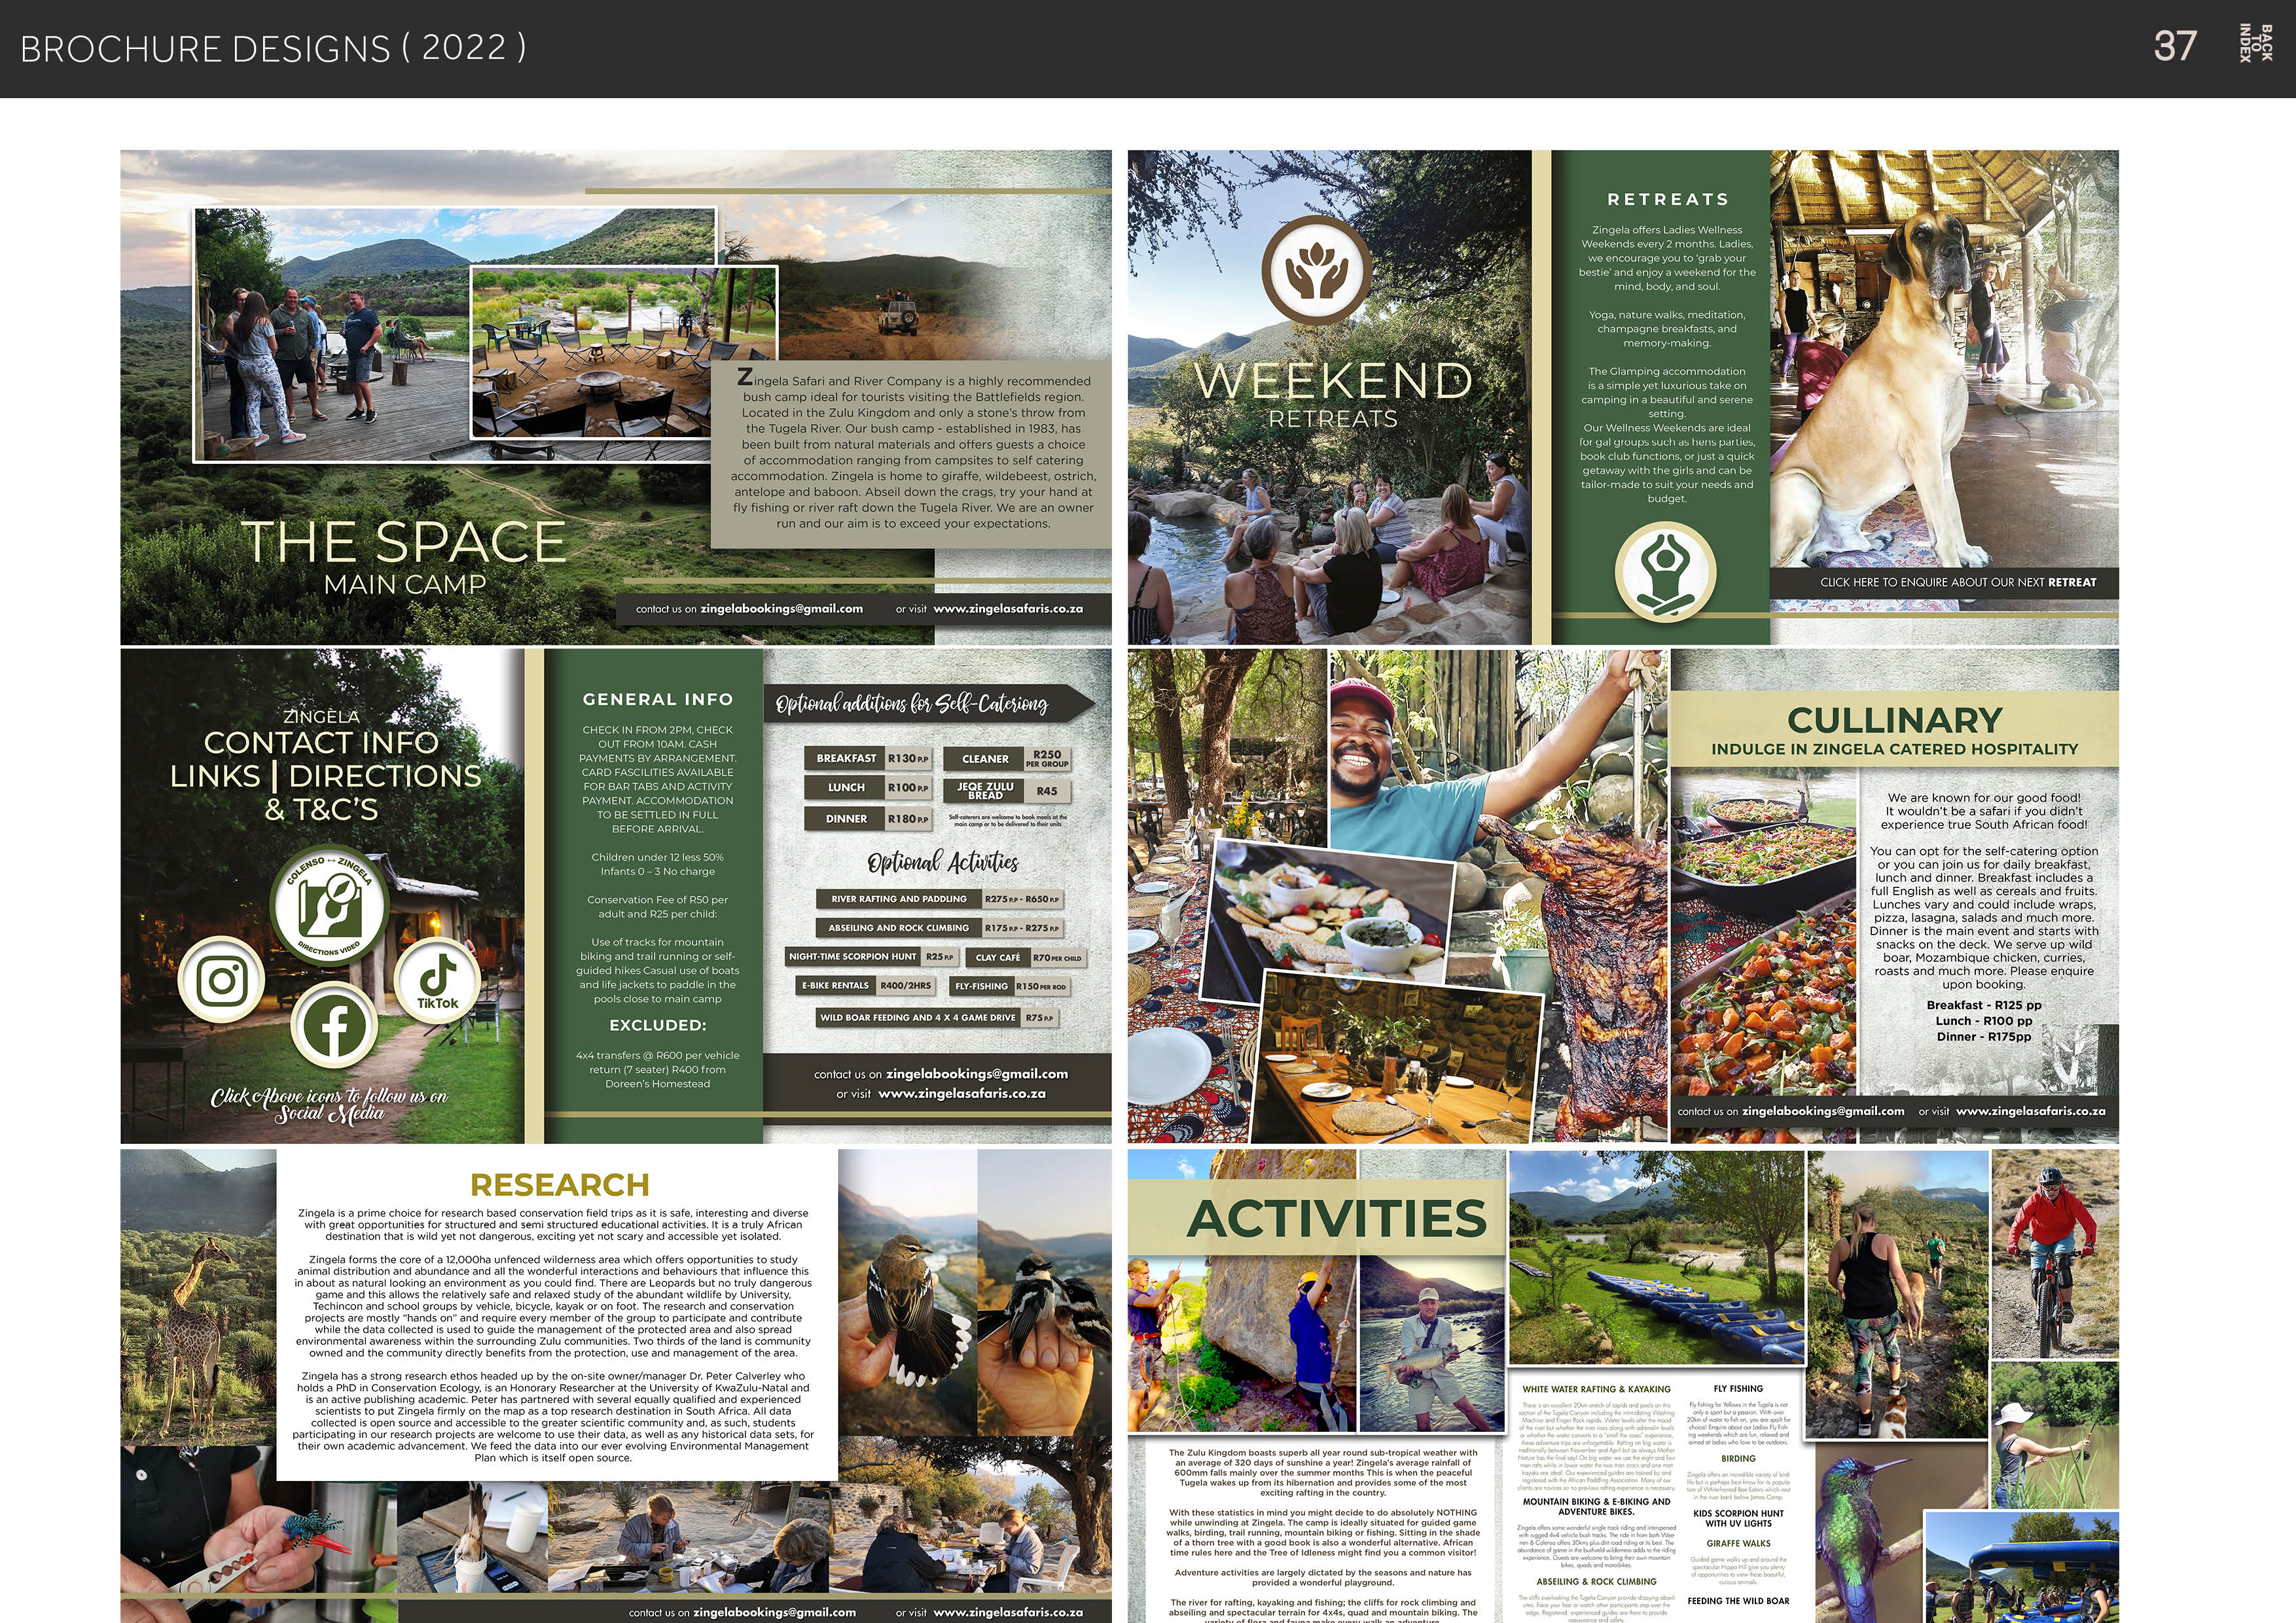 BROCHURE DESIGNS (2022)

RETREATS

Zingela offers Ladies Wellness
Weekends avery 2 months. Ladies,
We encourage you to ‘grab your
bestie’ anc enjoy a weekend for the

RR]

Ps
POT

     
   
   
   
   
   
   
   
   
     

oe
Tea!

Zingela Safari and River Company is a highly recommended e yet luxurious take on

bush camp Iceal for tourists visiting the Battlefields region “fuk : 3 in a beautiful and serena
Located in the Zulu Kingdom and only a stone's throw from a TR NES ¥ ’ EZLIGE)

the Tugela River. Qur bush camp - established in 1983, has 5 2 3 7 CE COE CR LT]
been built trom natural materials and otters guests a choice : b= . PIETER

of accommodation ranging from campsites to self catering
accommodation. Zingela is home to giraffe, wildebeest, ostrich,
fn antelope and baboon. Abseil down the crags, try your hand at

9 fly fishing or river raft down the Tugela River. We are an owner

run and our aim is to exceed your expectations.
MAIN CAMP

xt us on zingelabookings@gmail.com or vist www.zingelasaforis.co.za

GENERAL INFO | a La 17 Se LC)

son] [EER 42.
| Sed
Rl ply) |
IE | EEE
EEN ERT
Ee EET os veo |
PPT LF er x a
Use of tracks for mountain PR Ere
pe CEE | ET vo

§ hikes Casual use of lo

Hr CTY wecoiaves | [ERE vrs0mee |

ERTS Tres

EXCLUDED: EEE «os

CULLINARY

INDULGE IN ZINGELA CATERED HOSPITALITY

SITES SEE

    
   
   
   
   
   
   
   
     

We are known for our good food!
It wouldn't be a safari if you didn't
experience true South African food!

You can opt for the self-catering option
or you can join us for daily breakfast.
lunch and dinner. Breakfast includes a

full English as well as cereals and fruits

Lunches vary and could include wraps,
pizza, lasagna, salads and much more

Dinner is the main event and starts with
snacks on the deck. We serve up wild

boar, Mozambigue chicken, curries,
roasts and much more. Please enquire
upon booking

Breakfast - R125 pp

Lunch - R100 pp
Dinner - R175pp

 

   

     
  
  

contact us on zingelabookings@gmail.com

Click eifhove V0 ya 2 or visit. www.zingelasafaris.co.za &gt; .
BRIA Cid KES § : : S {a : : zingelabookings@gmail.com or visit www.zingelasafaris.co.za

AG

     
  
   
     
     
     
   
     
   
 
 
  
  
  
   
 
 
 
  

ime choice for research based ¢

     
  

Zingela forms the core of a 12,000ha

animal distribution and abundance ard all the wonderful interactions a

as natura ng an environment as you could ng T
game and the relatively safe and relaxed
Tec! ehicie, bicycle. kayak

projects are mostly

whe the dat

  

rs that influence this
s but no truly dangerous
iiiife by University

t. The research and conservation

&gt; 10 partic pate and contribute

ted area and also spread

he land is community
use anc management of the area

 
   
  
  

 

  
       
 
  
 
  

 

 

   

  

owned and the community directly benefits from the protec:

  
  
     
   
   
   
   

    
    

Zingela has a strong rese:
holds a PhD in Conserva
1s an active publishing

scientists to put Zingela firm!

er/manager Dr Peter Calveriey
the Un versity of KwaZuu-Natal
h several ecually qualtiec and experienced
the map as a top research destination in South Africa. Al data
essibie 10 the greater scientific community and, as such. stud
search projects are welcome to use their data. as well as any histoncal
dvancement We feed the data nto our ever evolving Environmental M
Plan which is itself open source

     

 

WHITE WATER RAFTING &amp; KAYAKING FLY FISHING

  

    
   
 

       
 

   
 
     
   
 
   
     
   

a year! Zingela's avi
o summer months This is when the peacelu
10me of the most

  
 
     
   
       
   
   
 

MOUNTAIN BIKING &amp; £-8IKING AND
ADVENTURE BIKES KIDS SCORPION HUNT
WITH UV LIGHTS

 

    
 

tree with a 900d book 1s also a wondertu’
time rules here and the Tree of idleness Might find you a common vi

GRAFFE WALKS

Adventure act ely cictated by the seasons a

a wonderful playground | ABSEIING &amp; ROCK C

        

FEEDING THE WILD BOAR